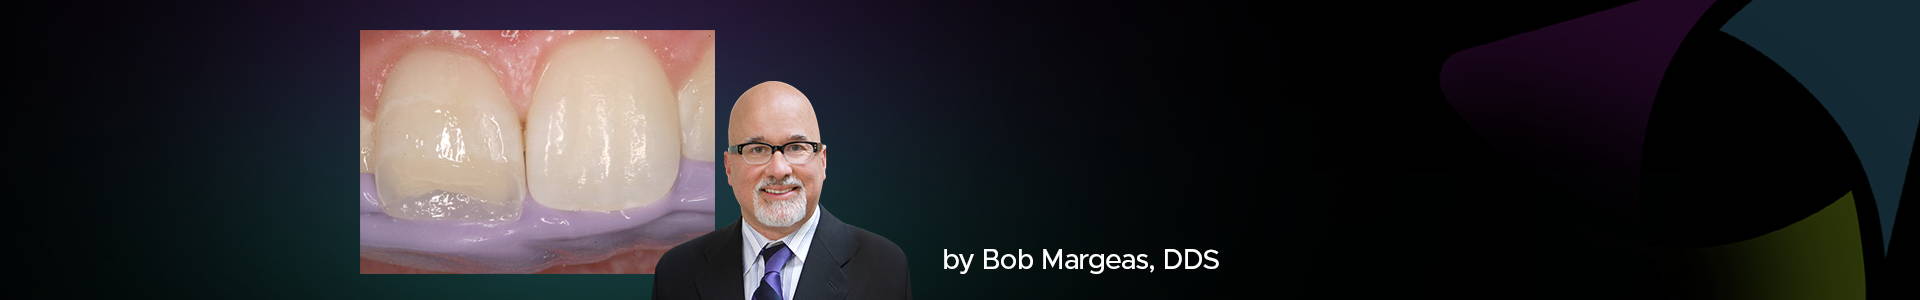 Blog banner of Dr Bob Margeas and a clinical image in the back